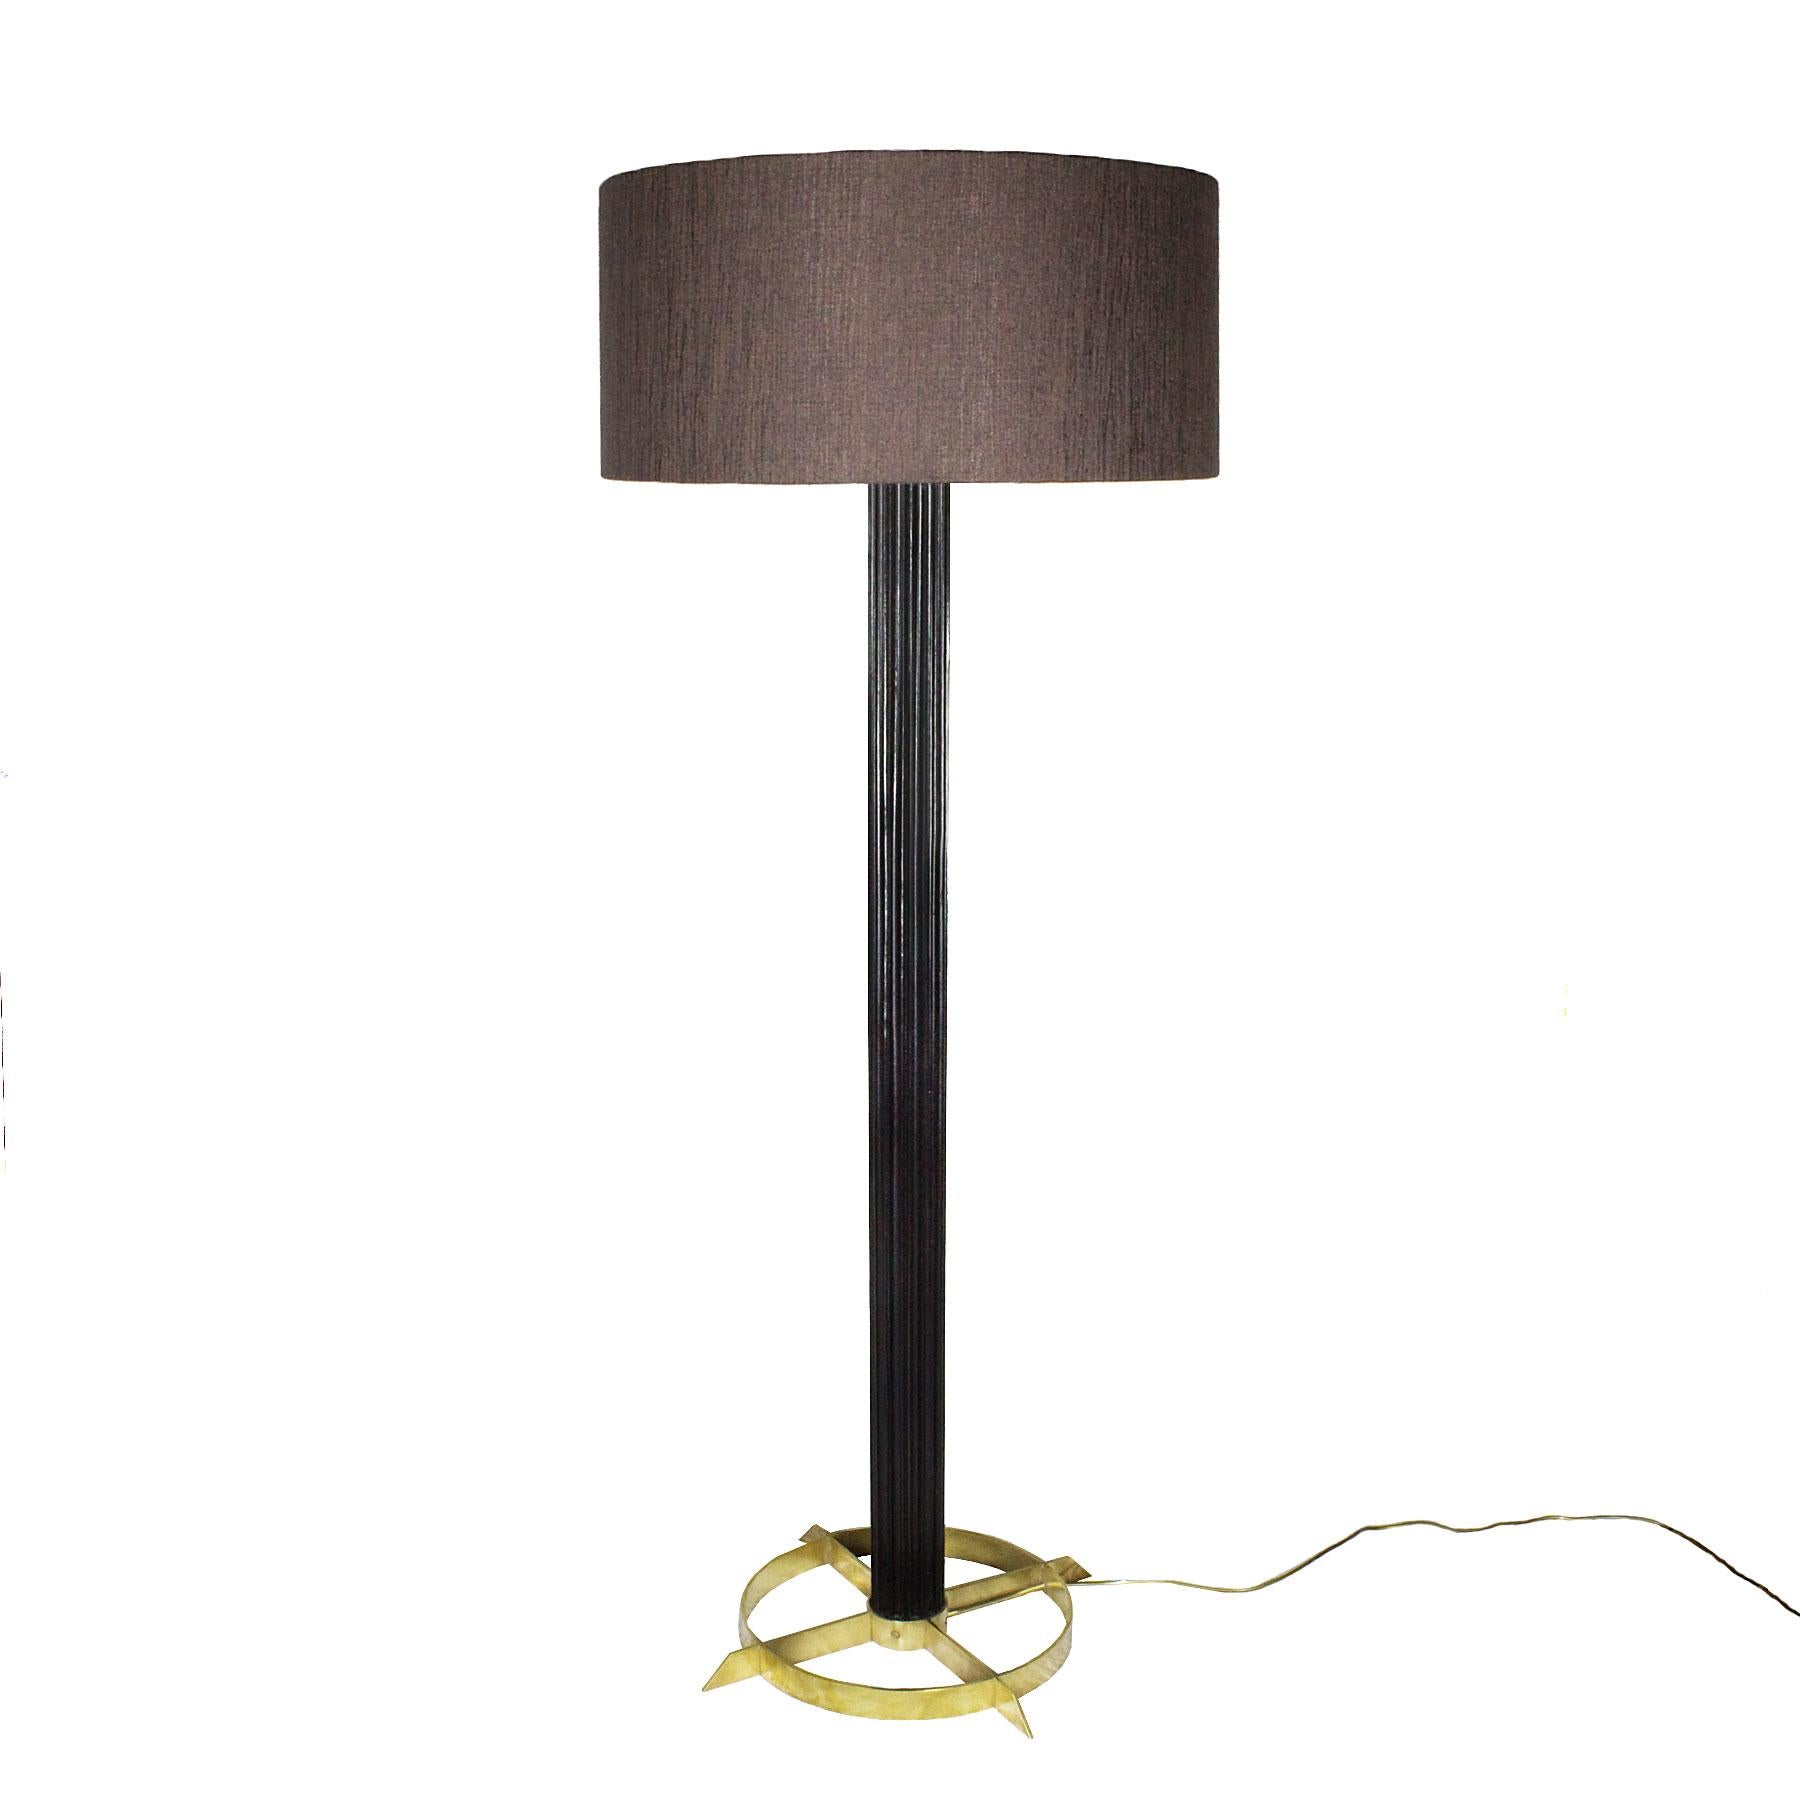 Standing lamp with stained and waxed striated walnut stand and solid brass base. Redone double lightning system. Taupe fabric lampshade.

Design: Jordi Vilanova 

Spain, Barcelona circa 1960.